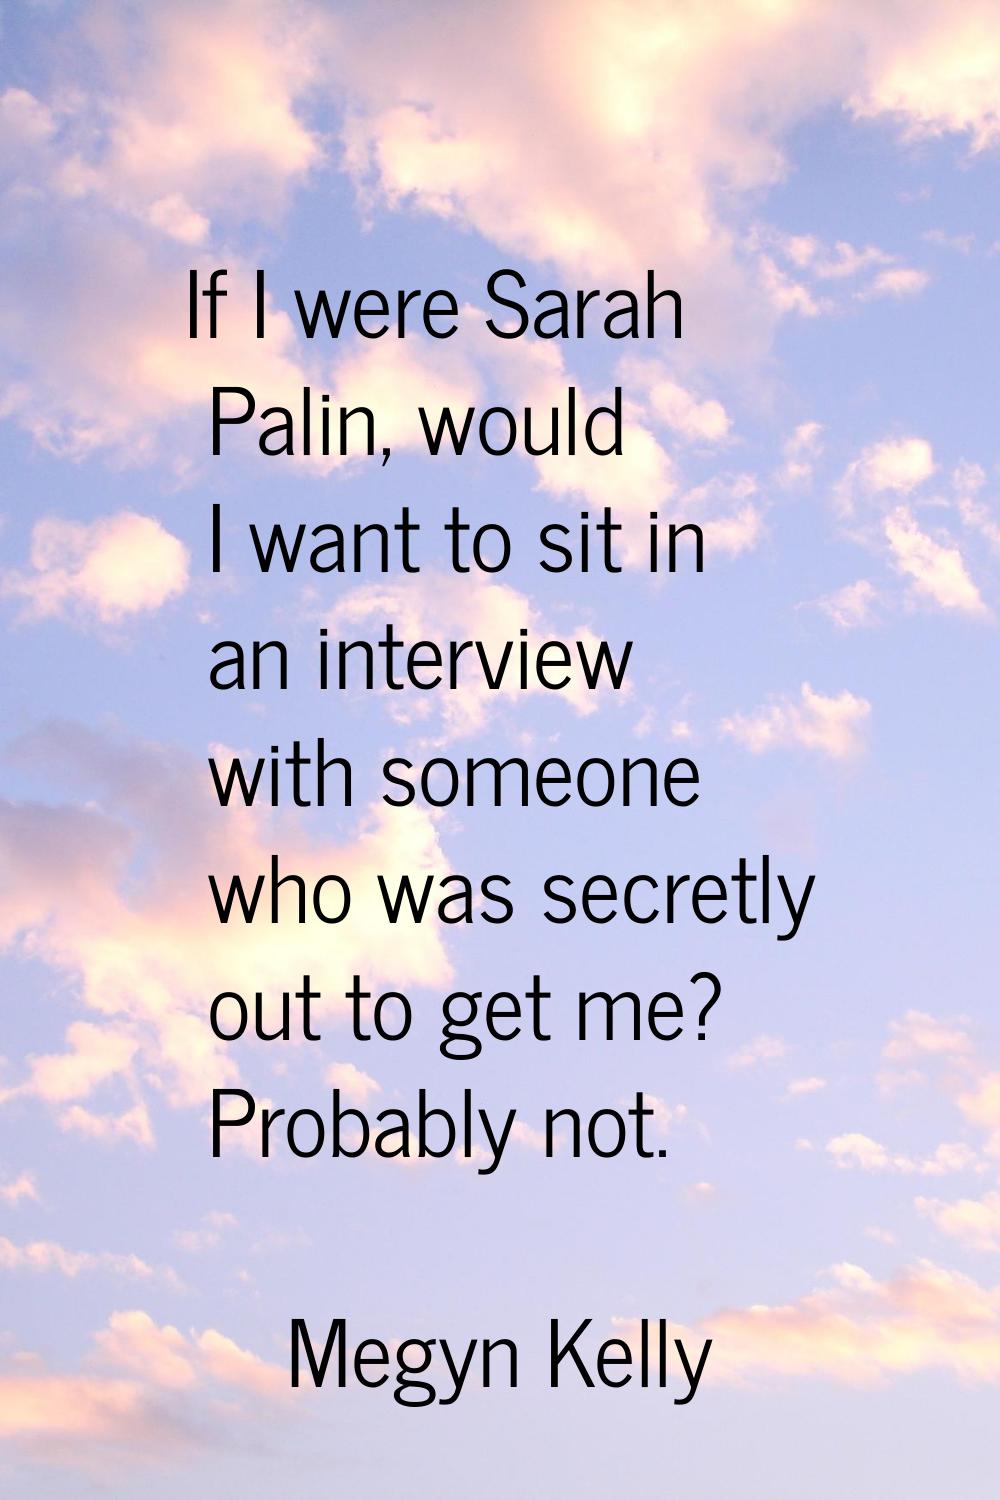 If I were Sarah Palin, would I want to sit in an interview with someone who was secretly out to get